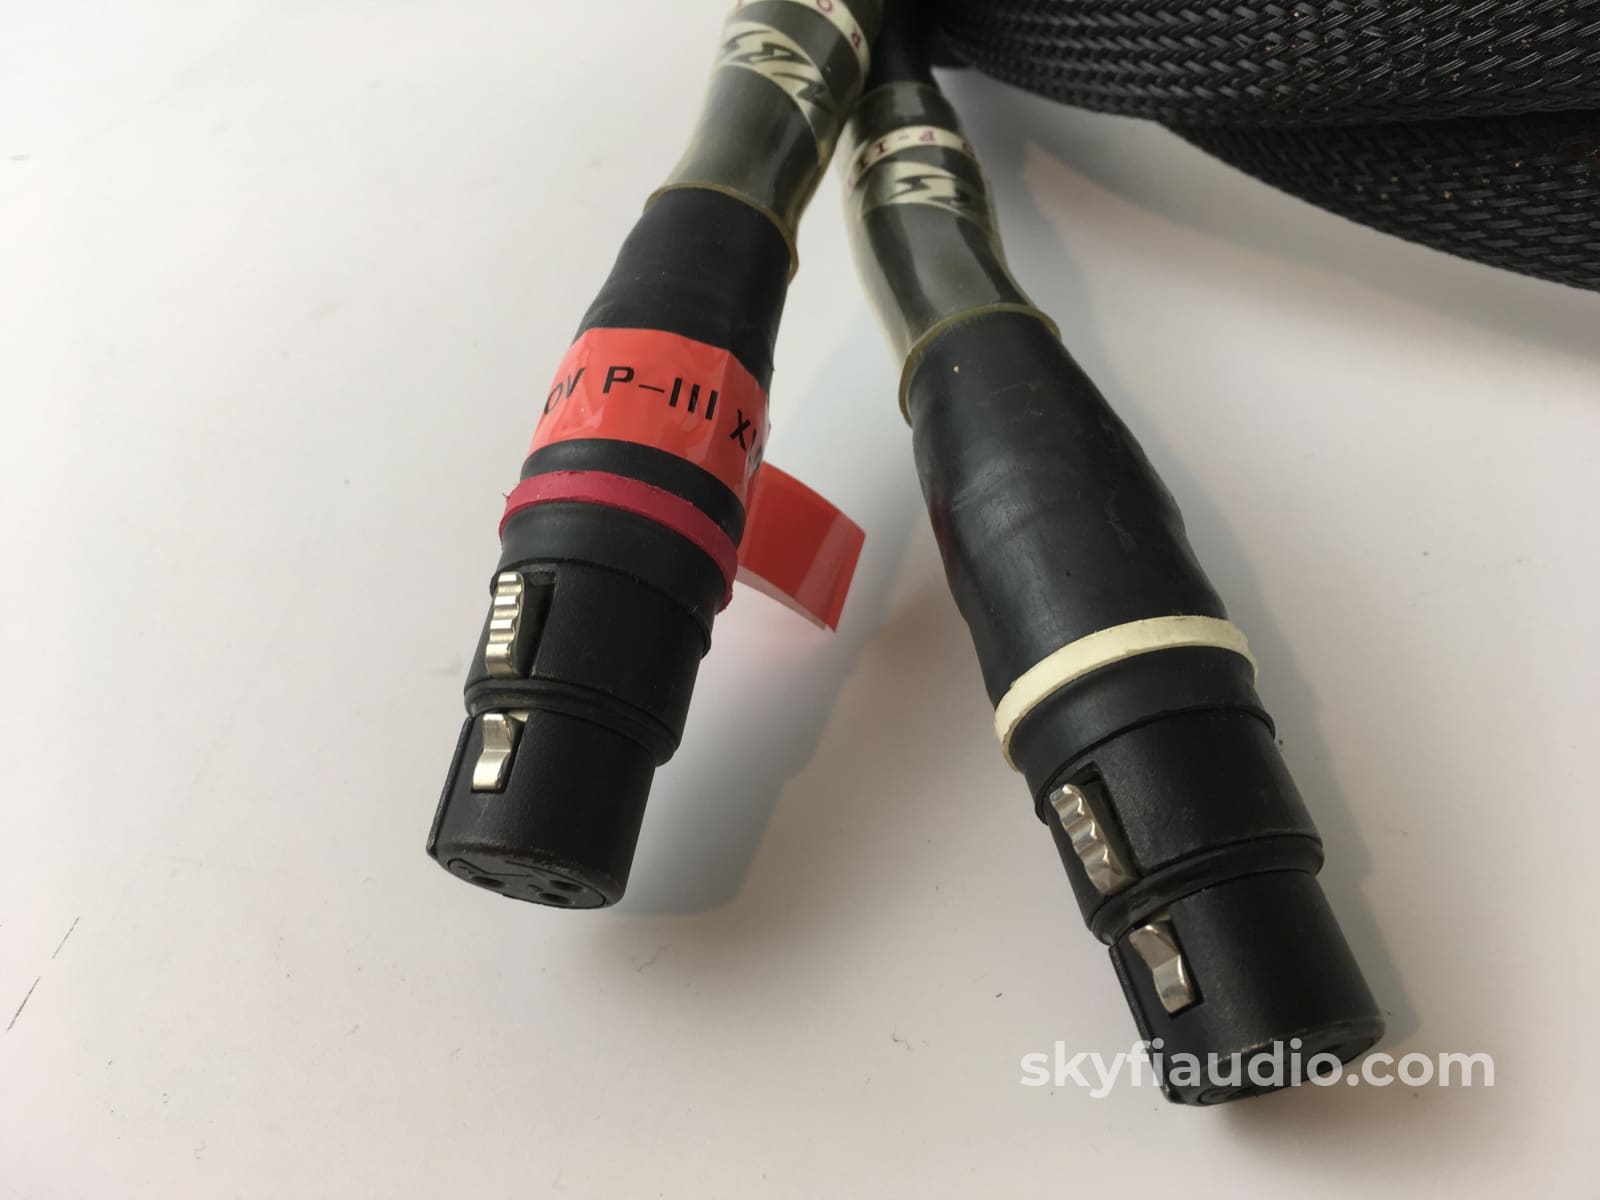 Nbs Professional-Iii Xlr Audio Cable - 2 Meters Cables